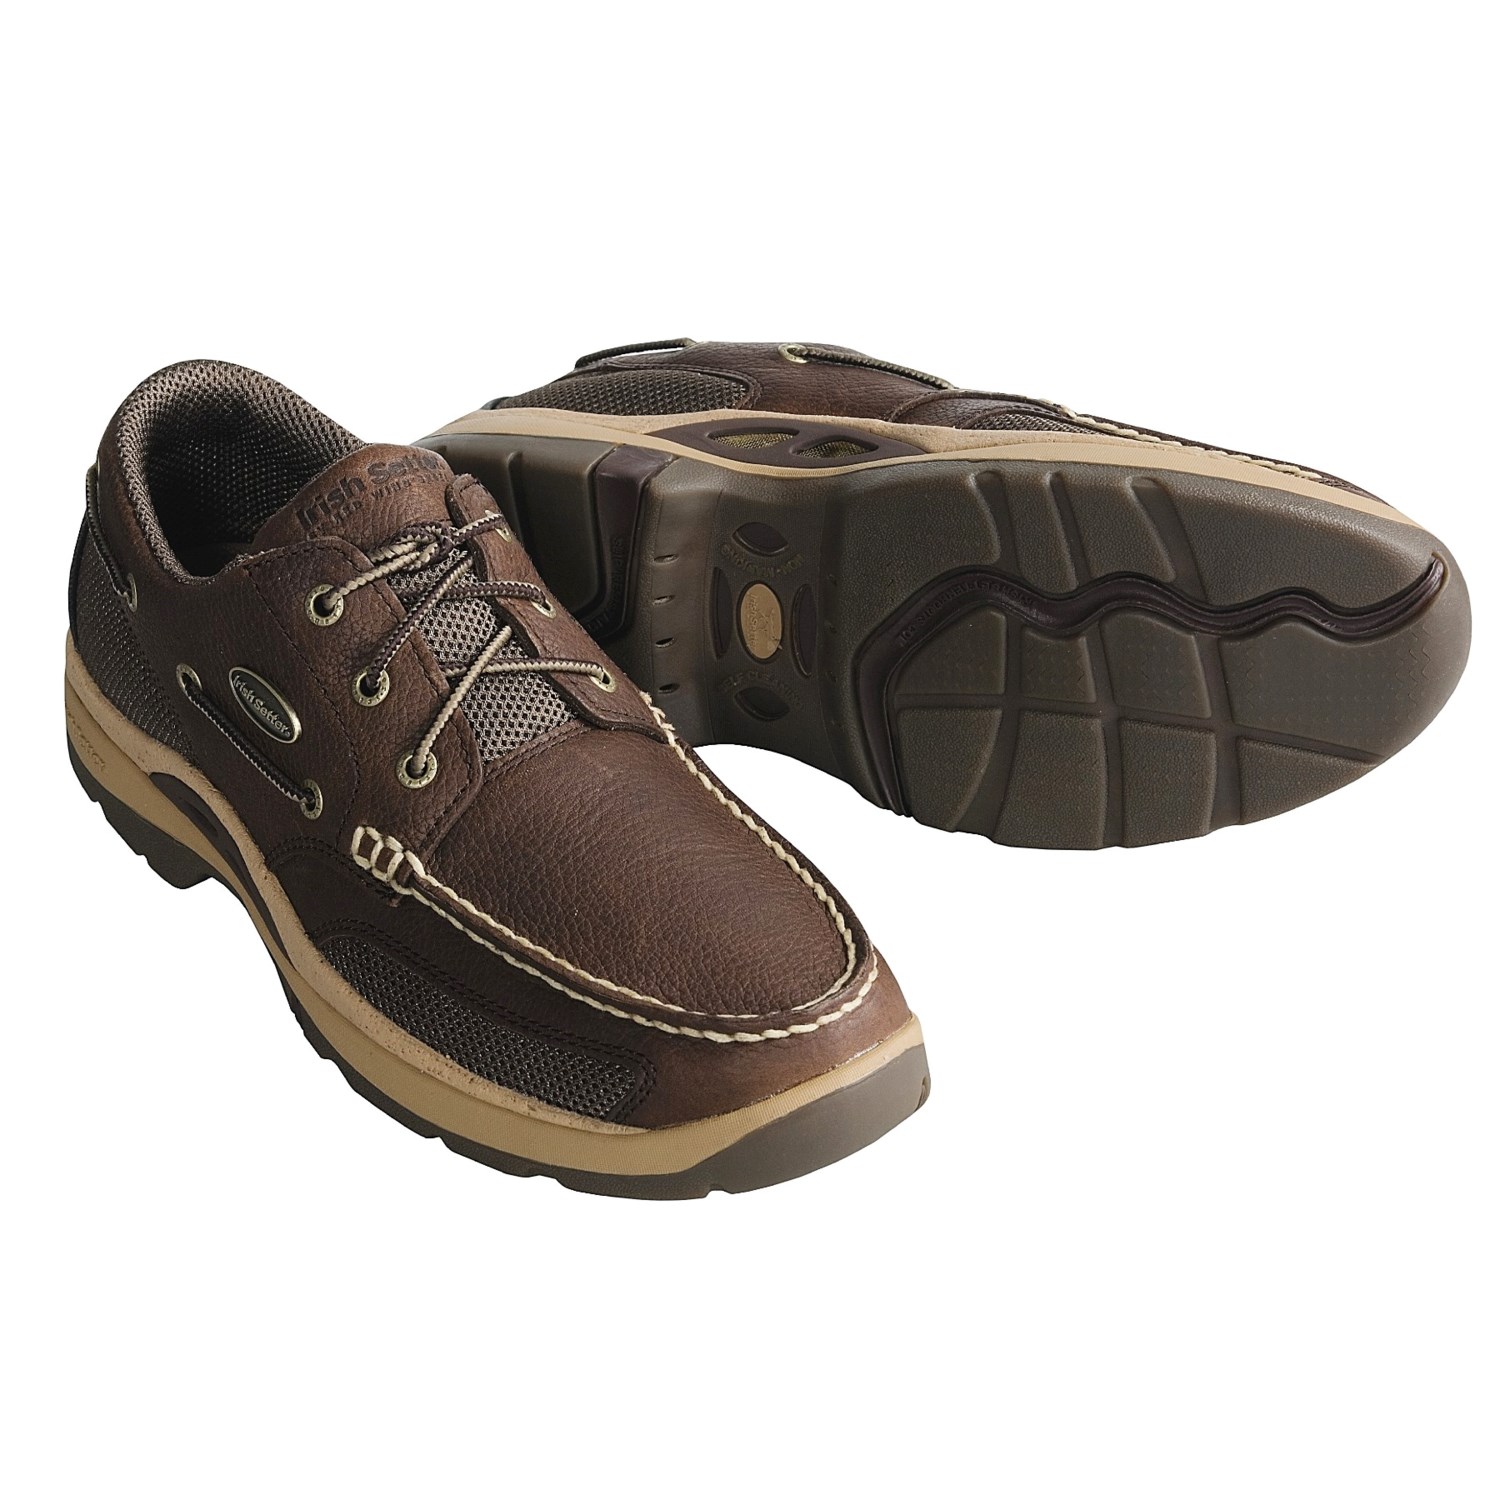 Irish Setter Tidewater Boat Shoes (For Men) 86216 - Save 44%